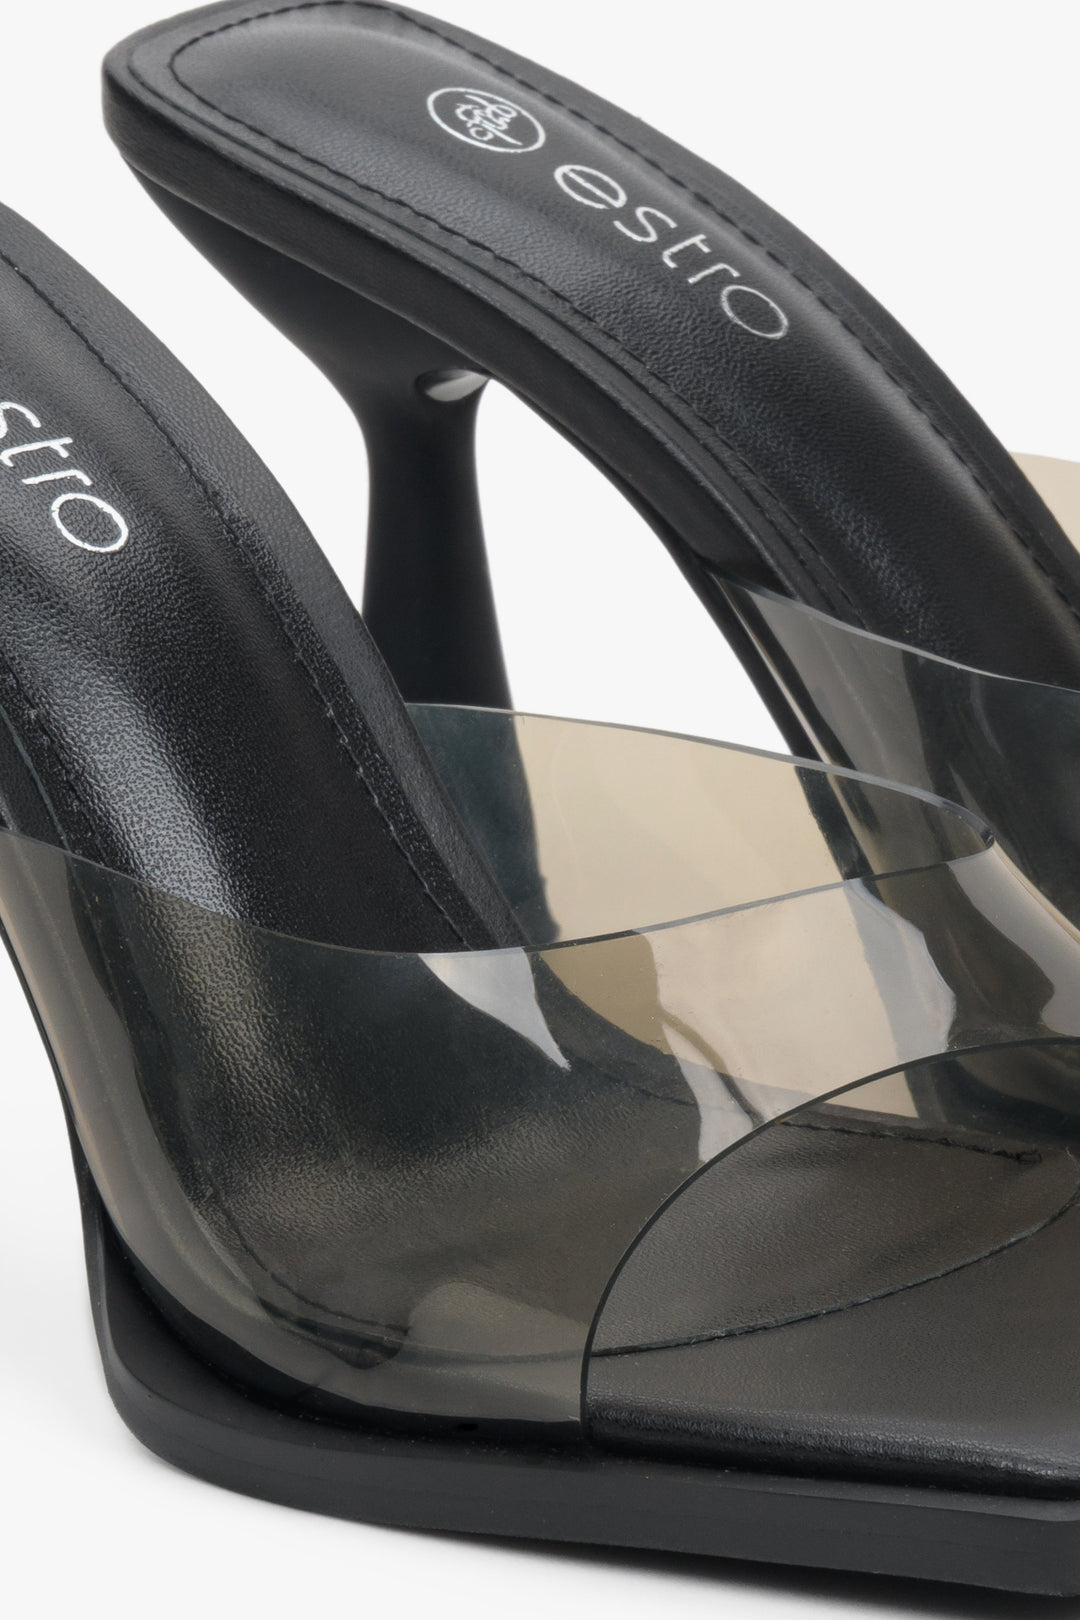 Estro women's clear sandals with a black sole - close-up on the details.